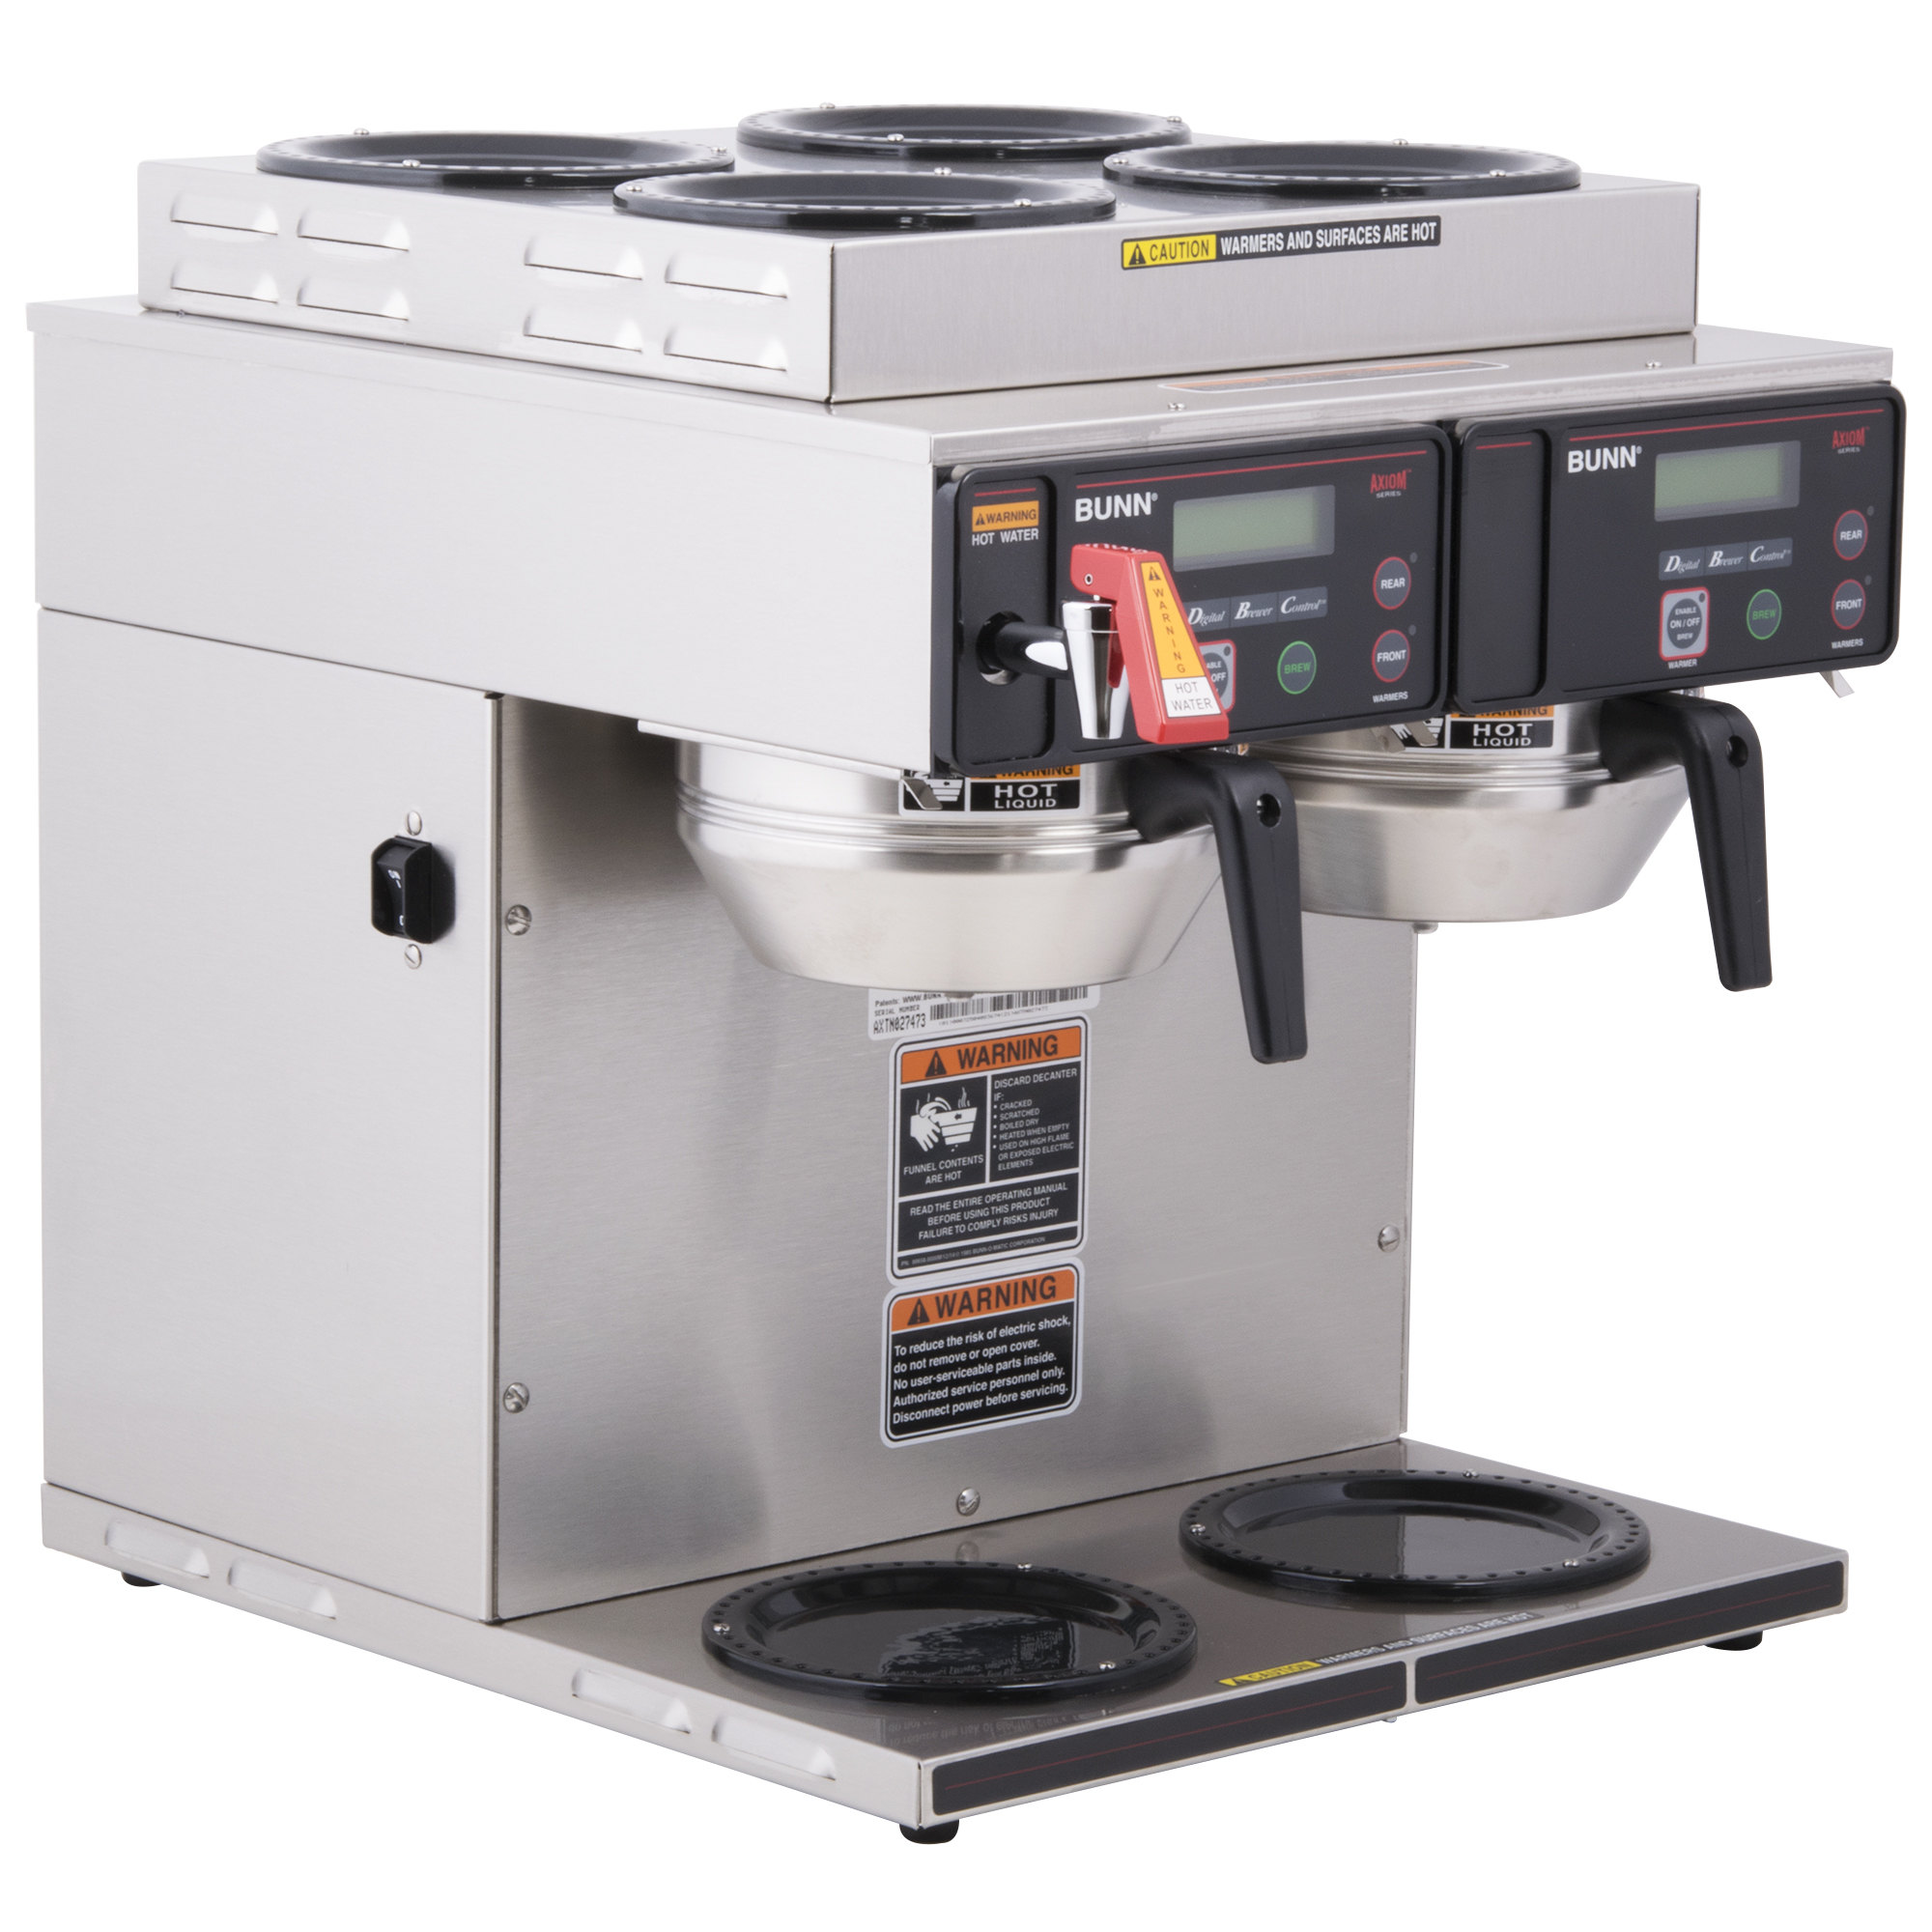 Bunn 38700.0014 AXIOM 4/2 Twin Connected Coffee Brewer for sale online 